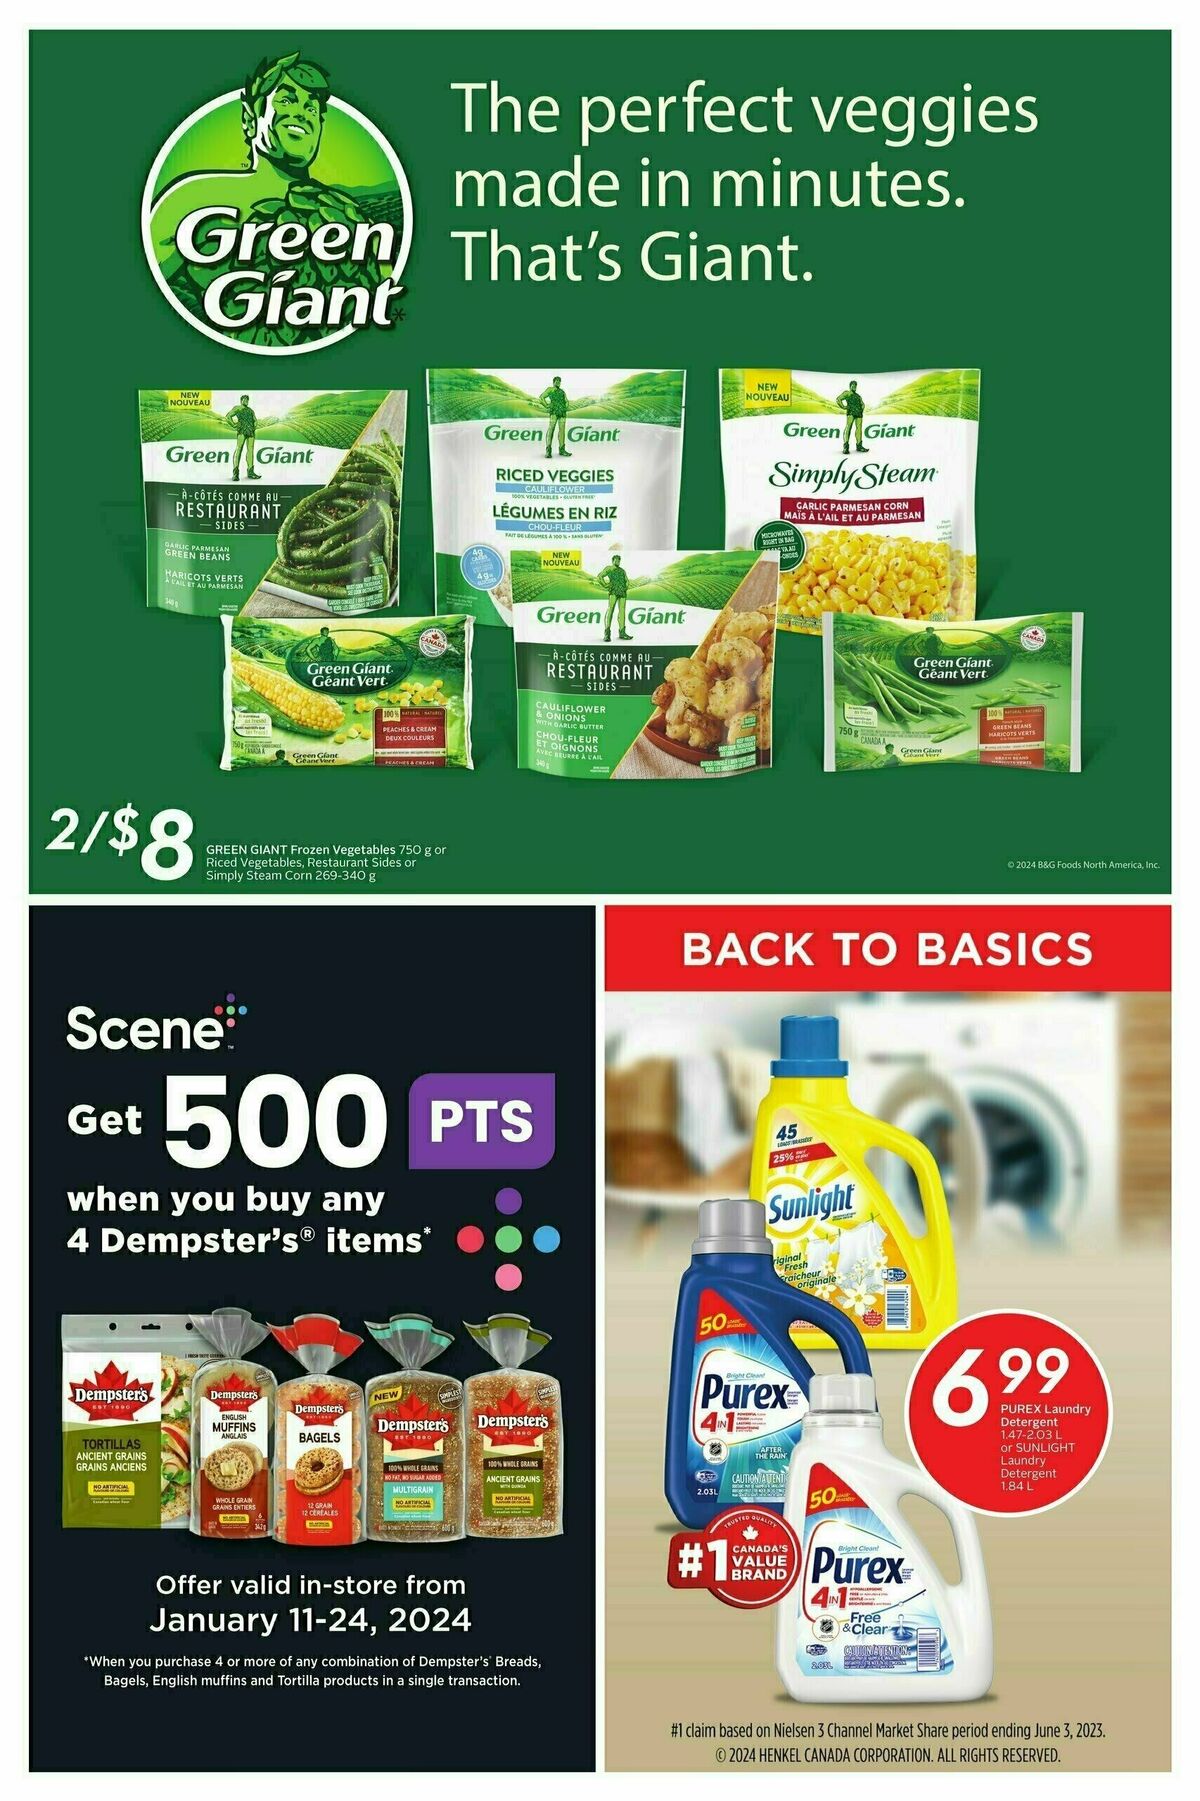 Safeway Flyer from January 18